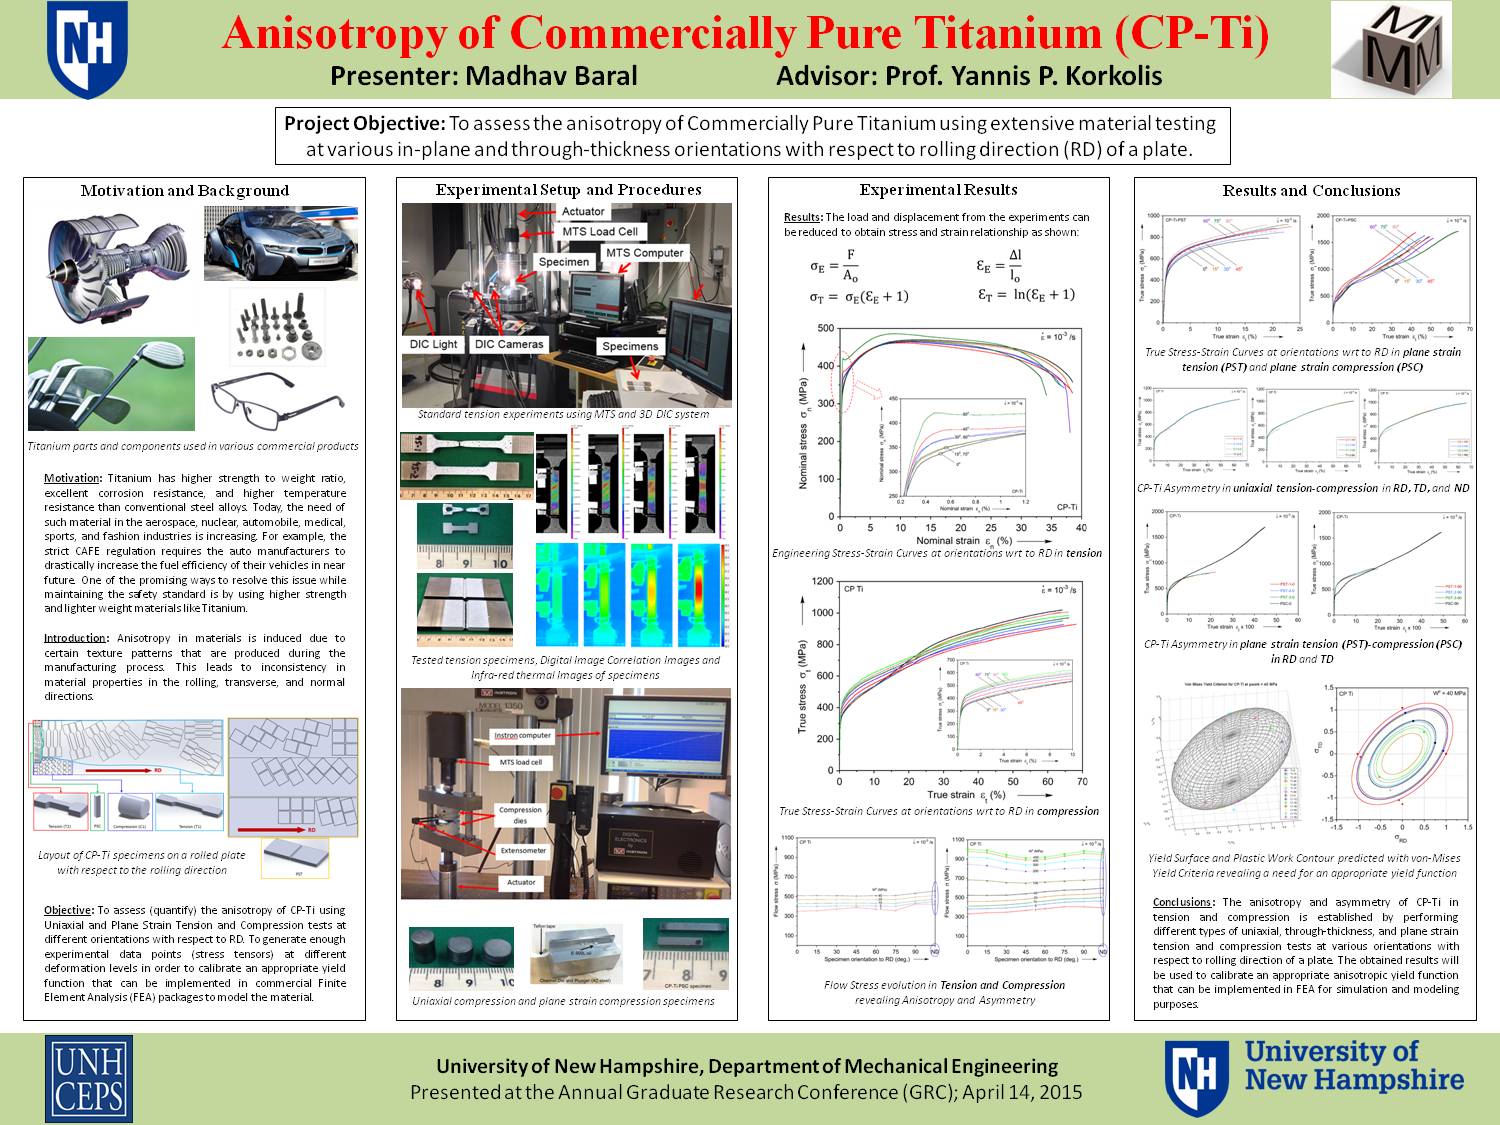 Anisotropy Of Commercially Pure Titanium by madhavbaral1988